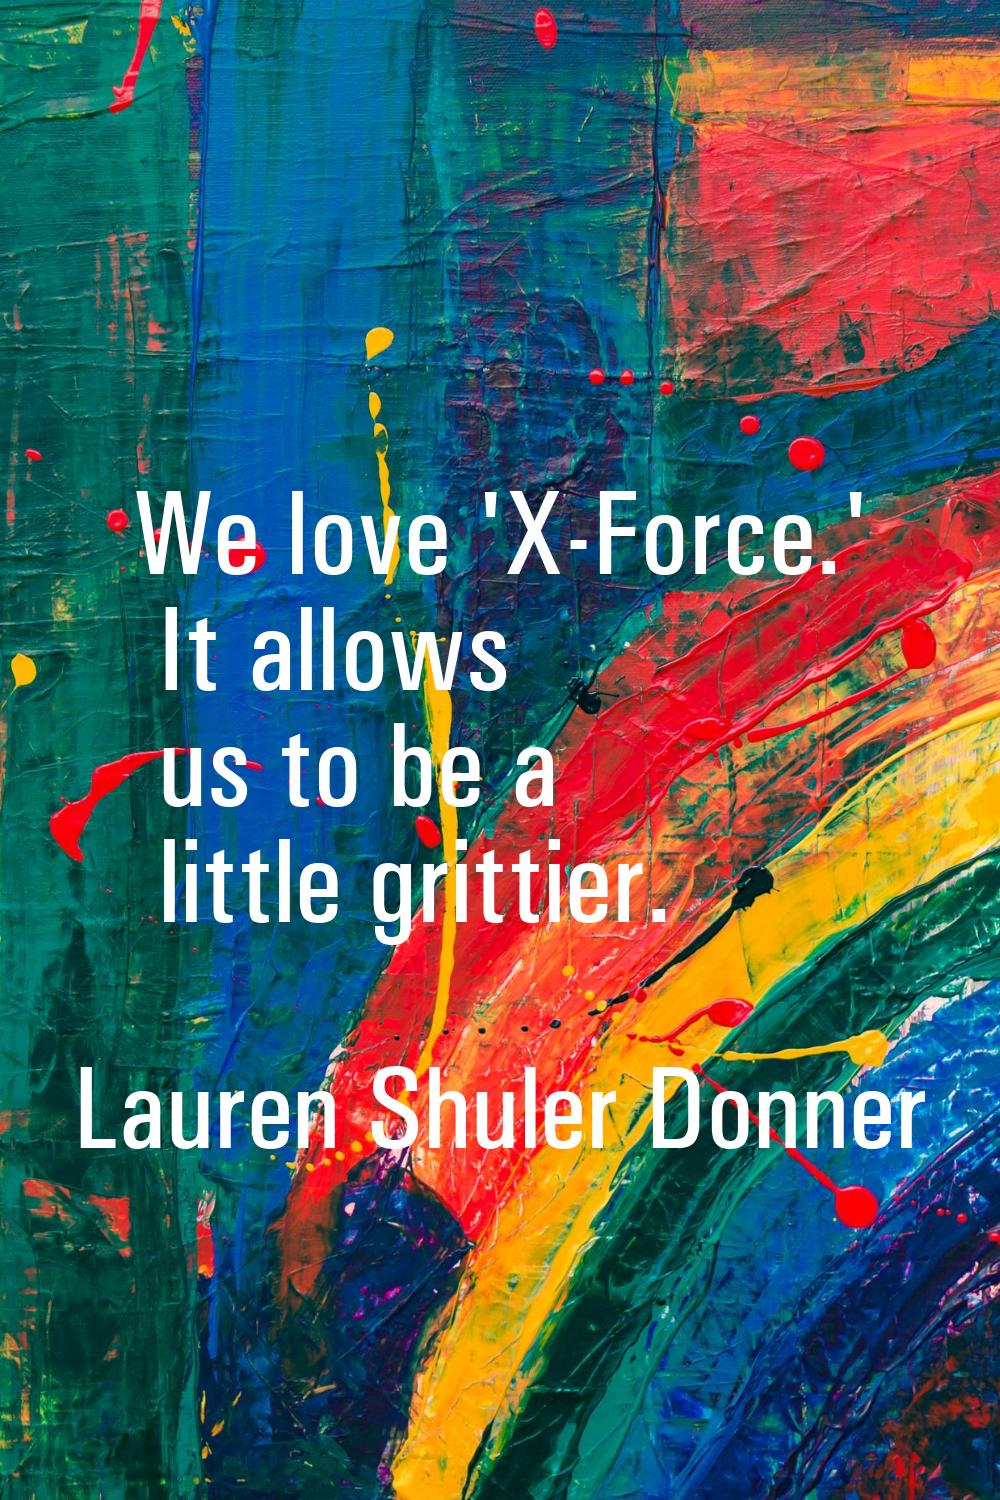 We love 'X-Force.' It allows us to be a little grittier.